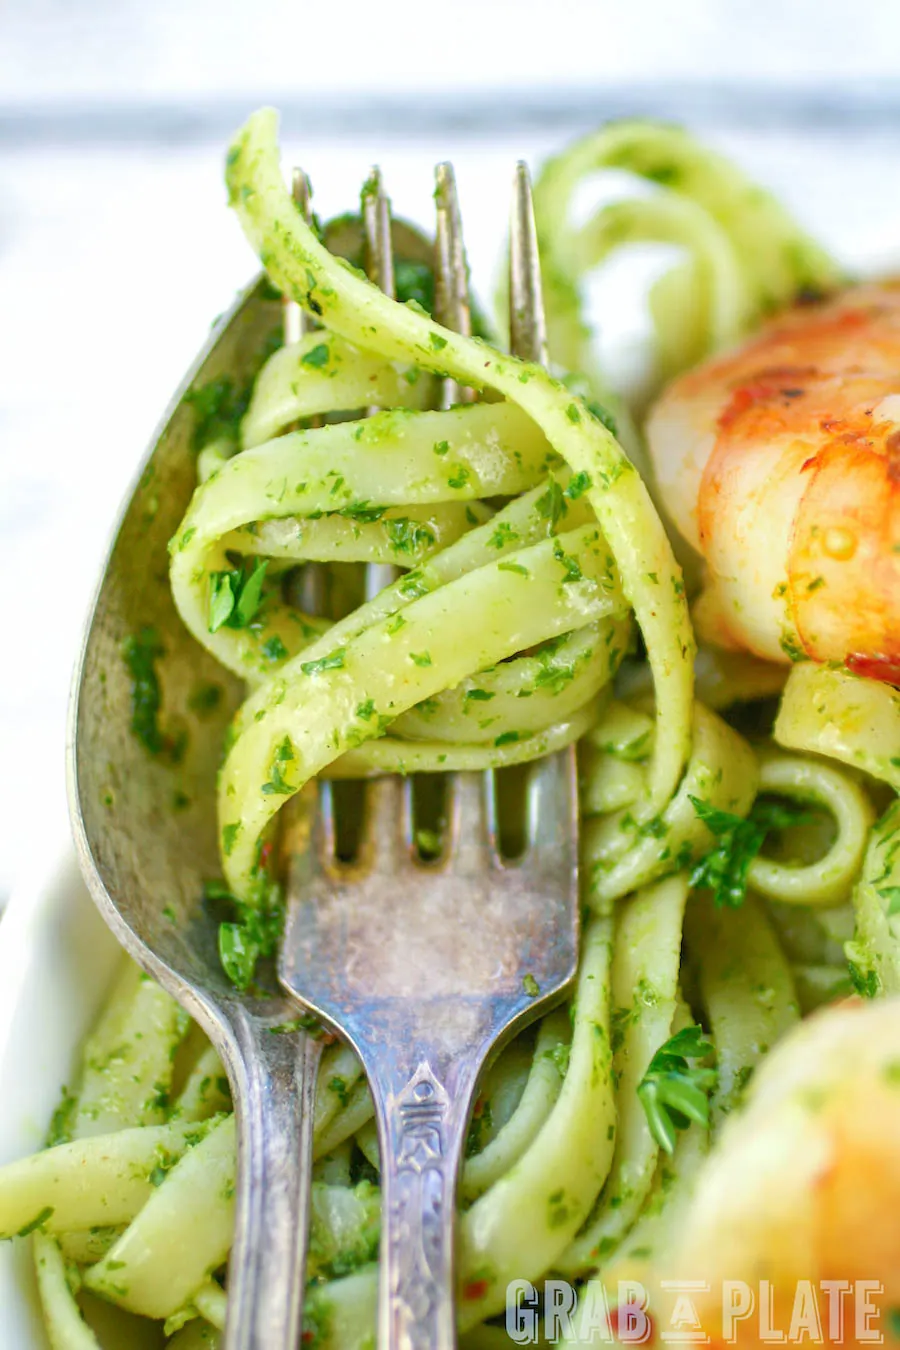 Chimichurri Pasta with Grilled Spicy Shrimp is a delicious dish for dinner. Twirl up a forkful of Chimichurri Pasta with Grilled Spicy Shrimp at your next meal.